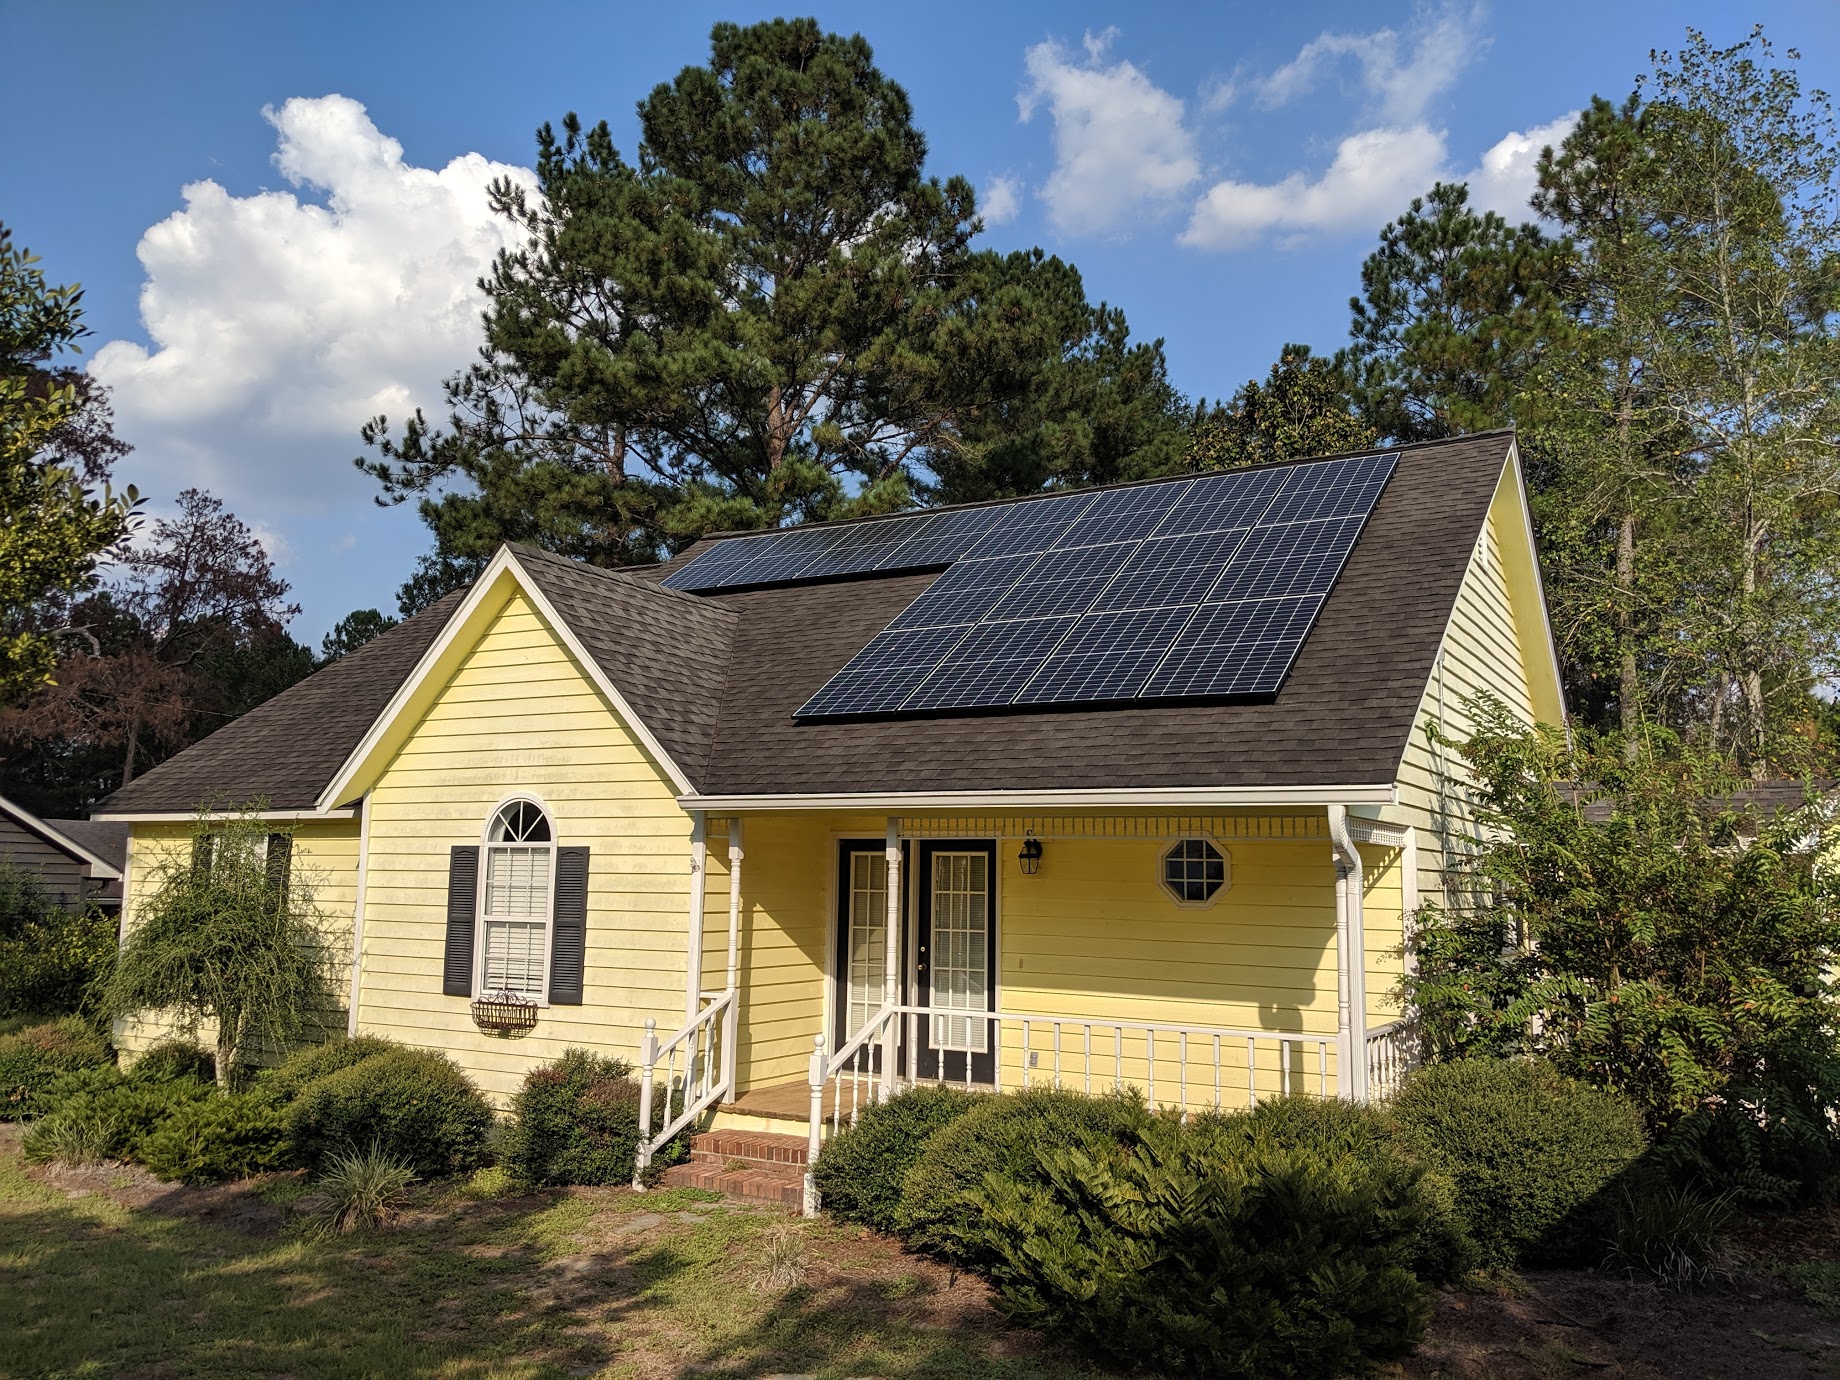 Image 2- A grid tie system with battery backup made this small home in Moultrie, Georgia NetZero!